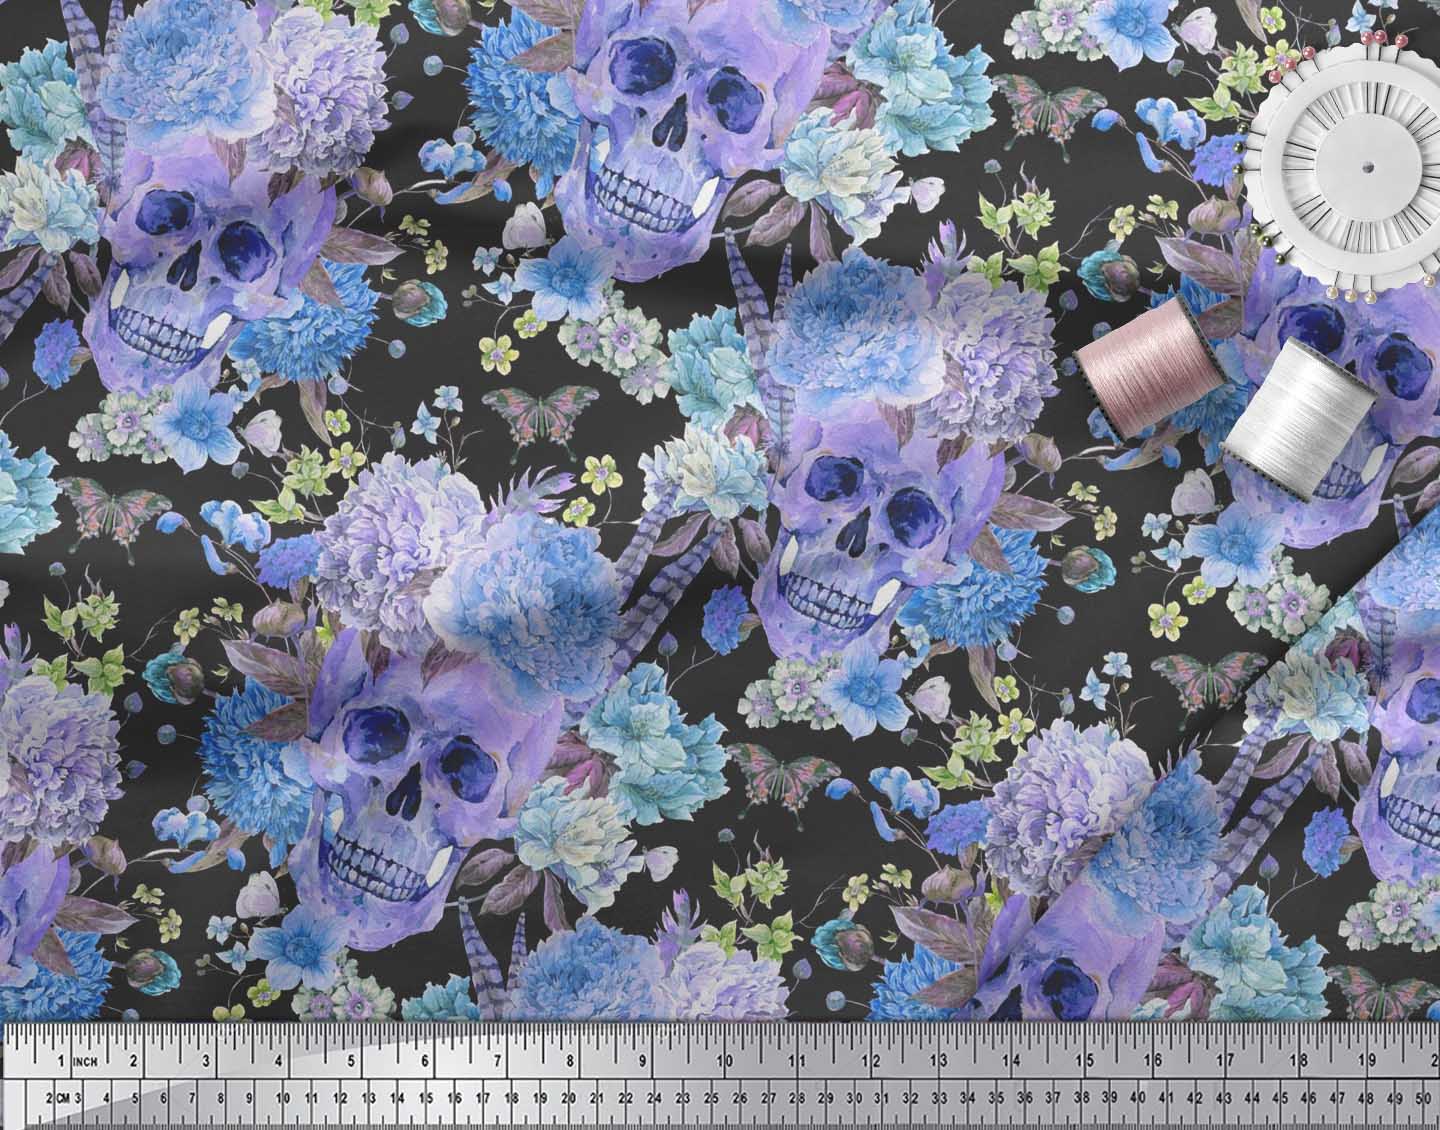 Soimoi Fabric Floral & Cow Skull Head Damask Print Fabric by the Meter DK-502B 